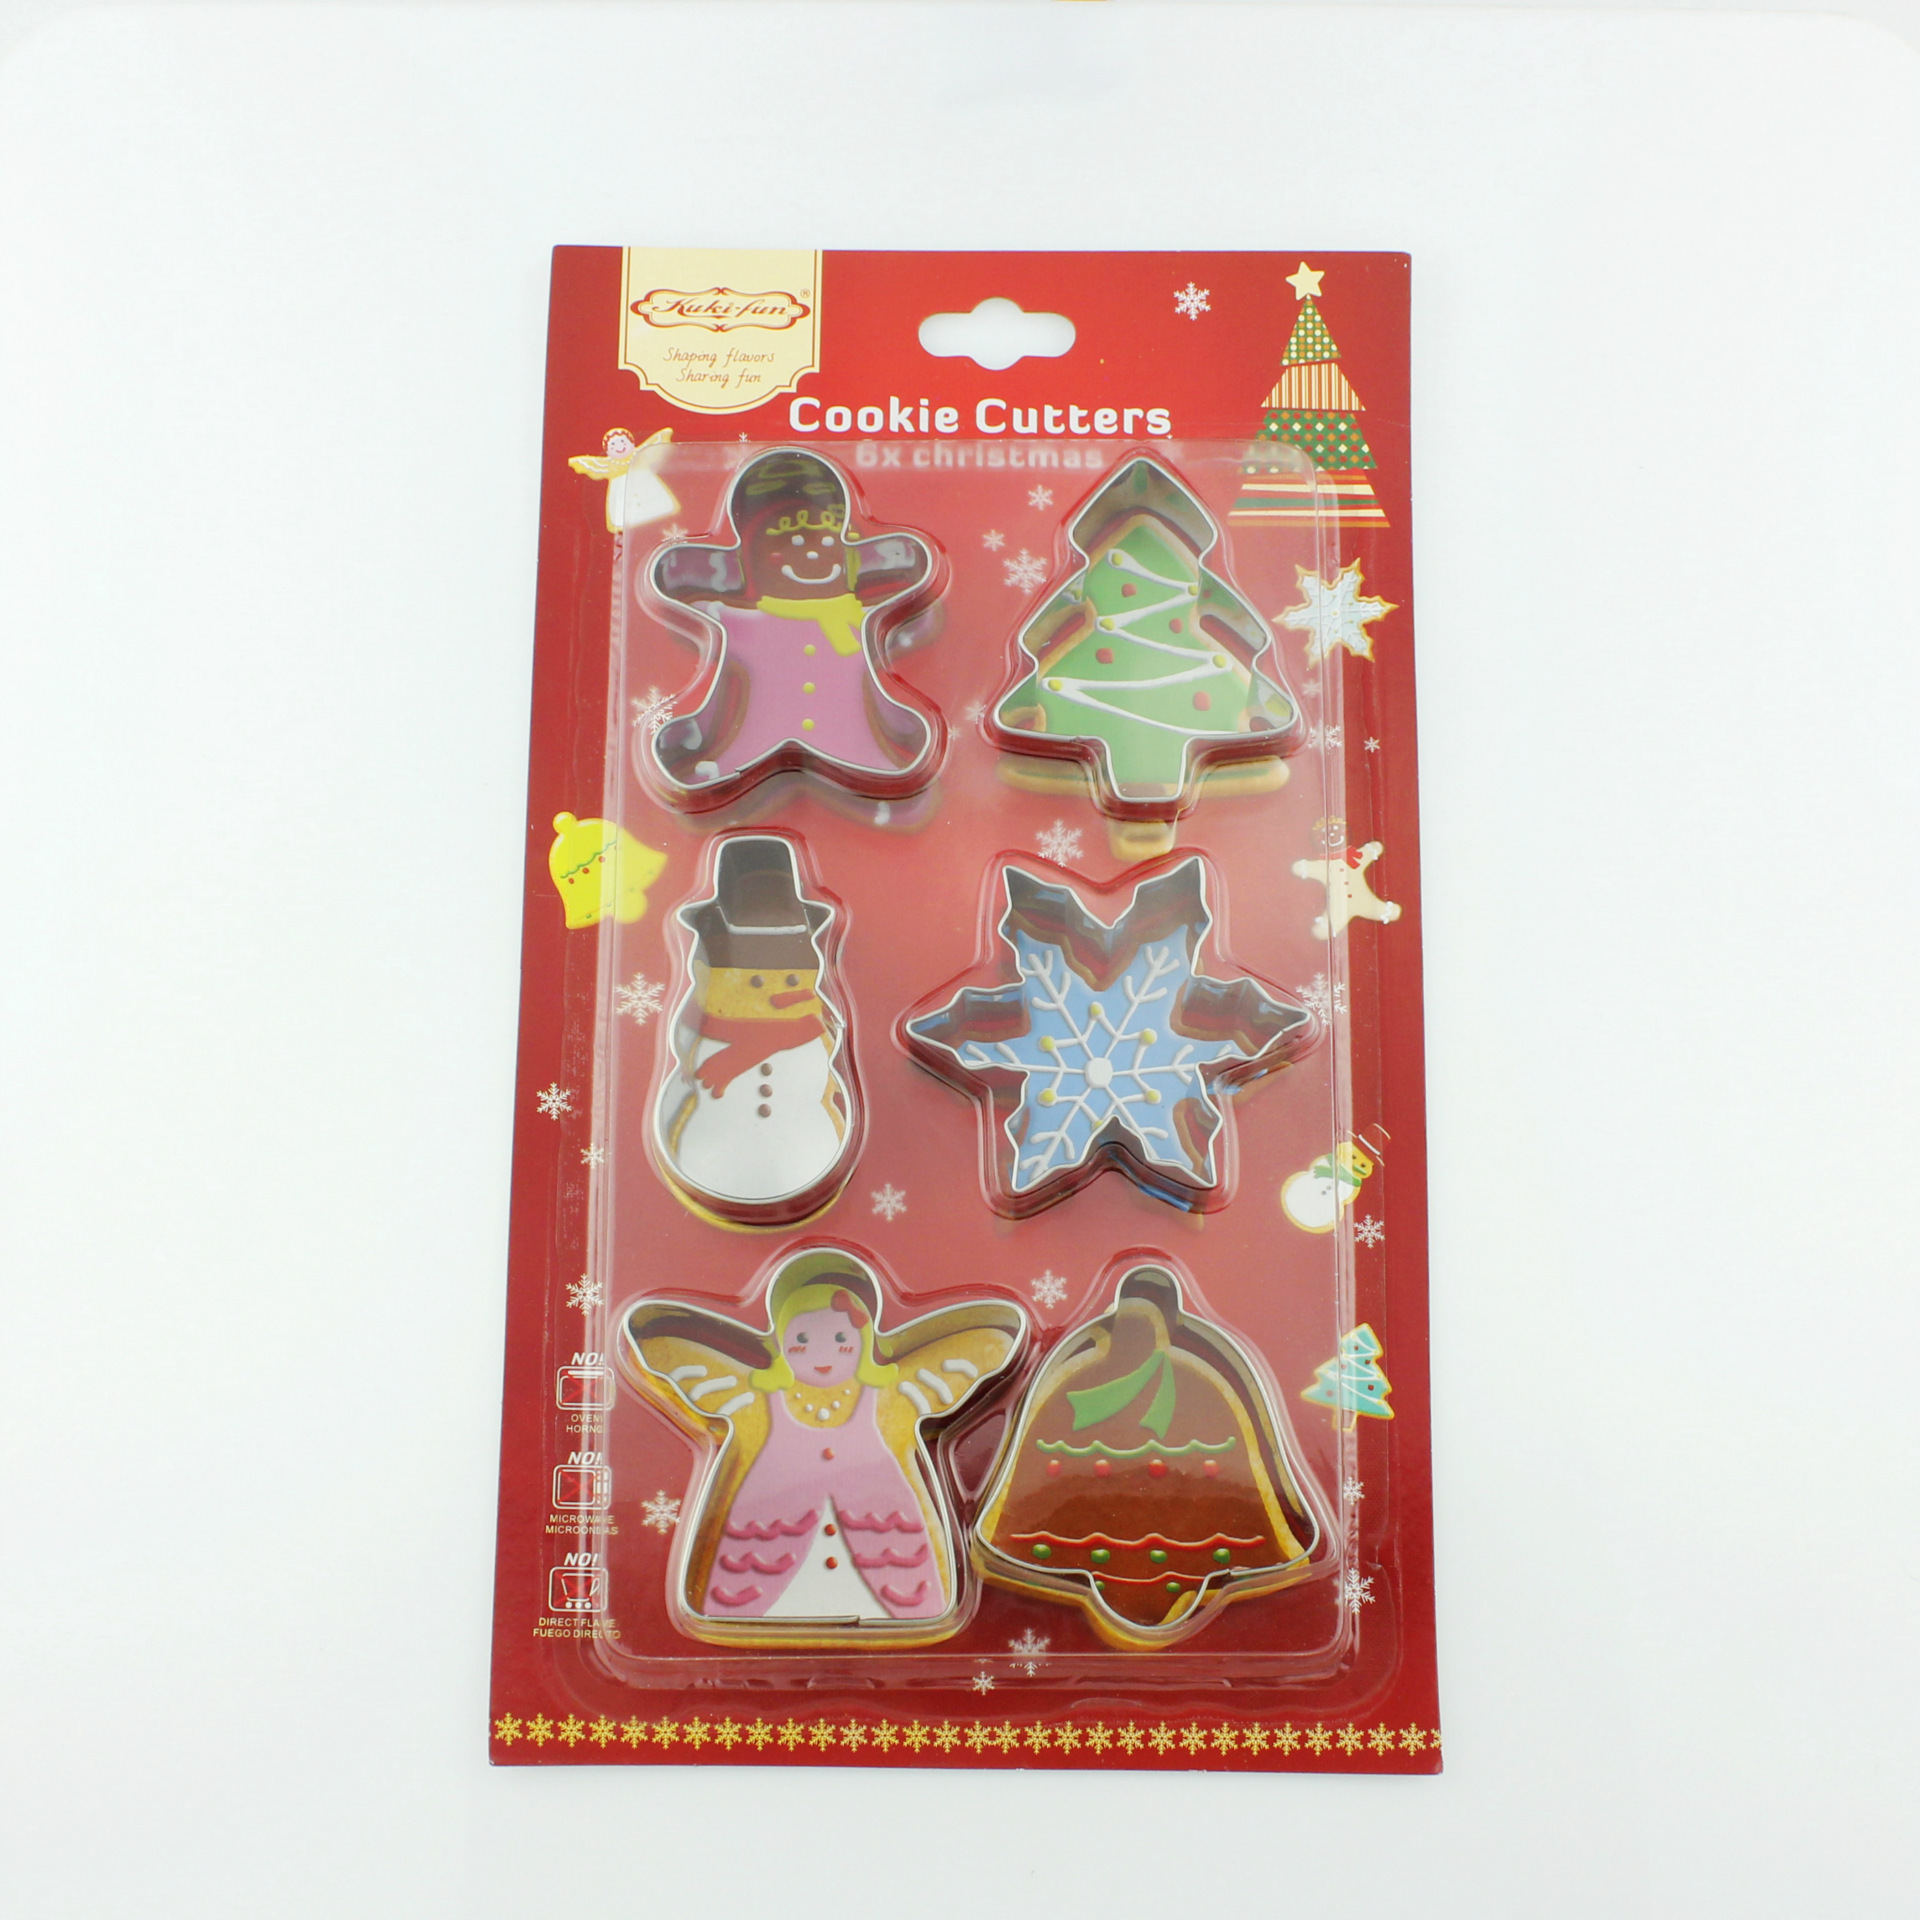 New 6 Pcs Large Christmas Tree Snowflake Snowman Mold Stainless Steel Cookie Cutter Set